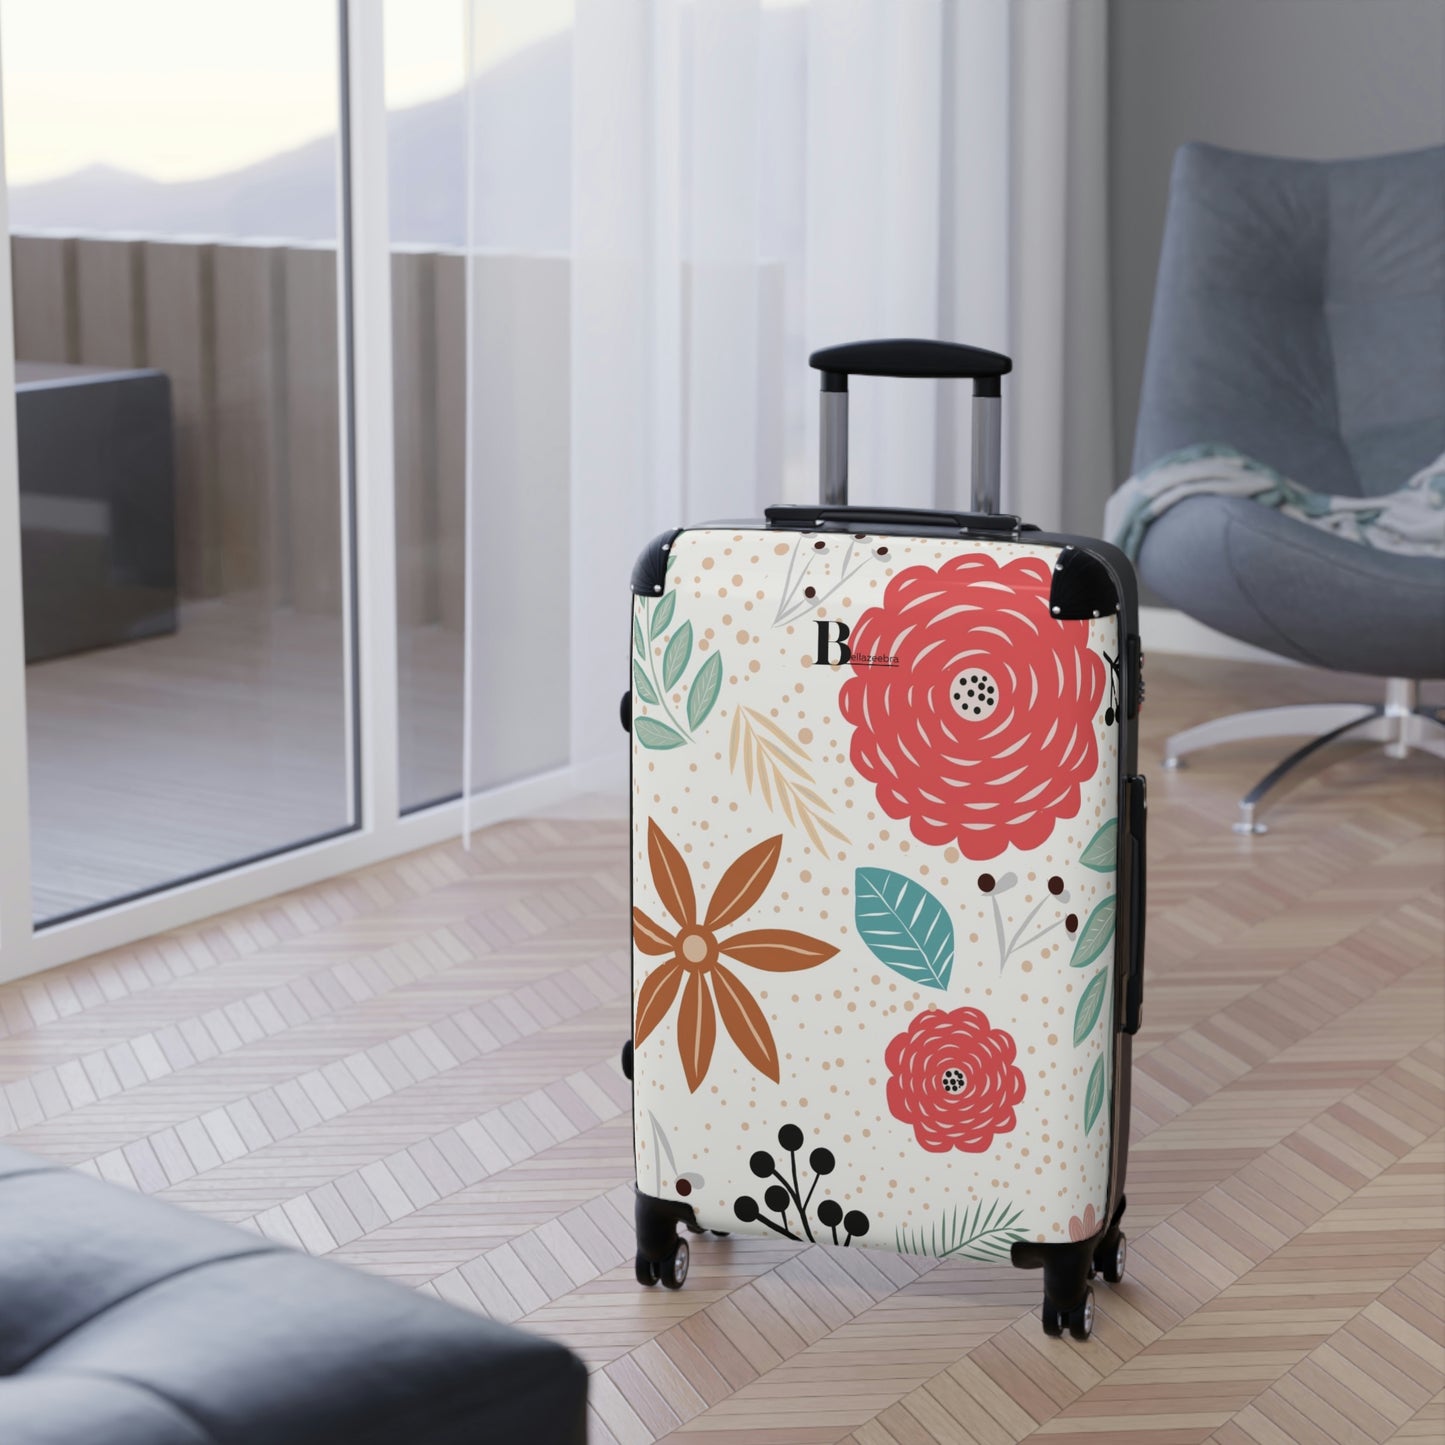 BELLAZEEBRA Customized hard-shell suitcases with whimsical flower prints on white background